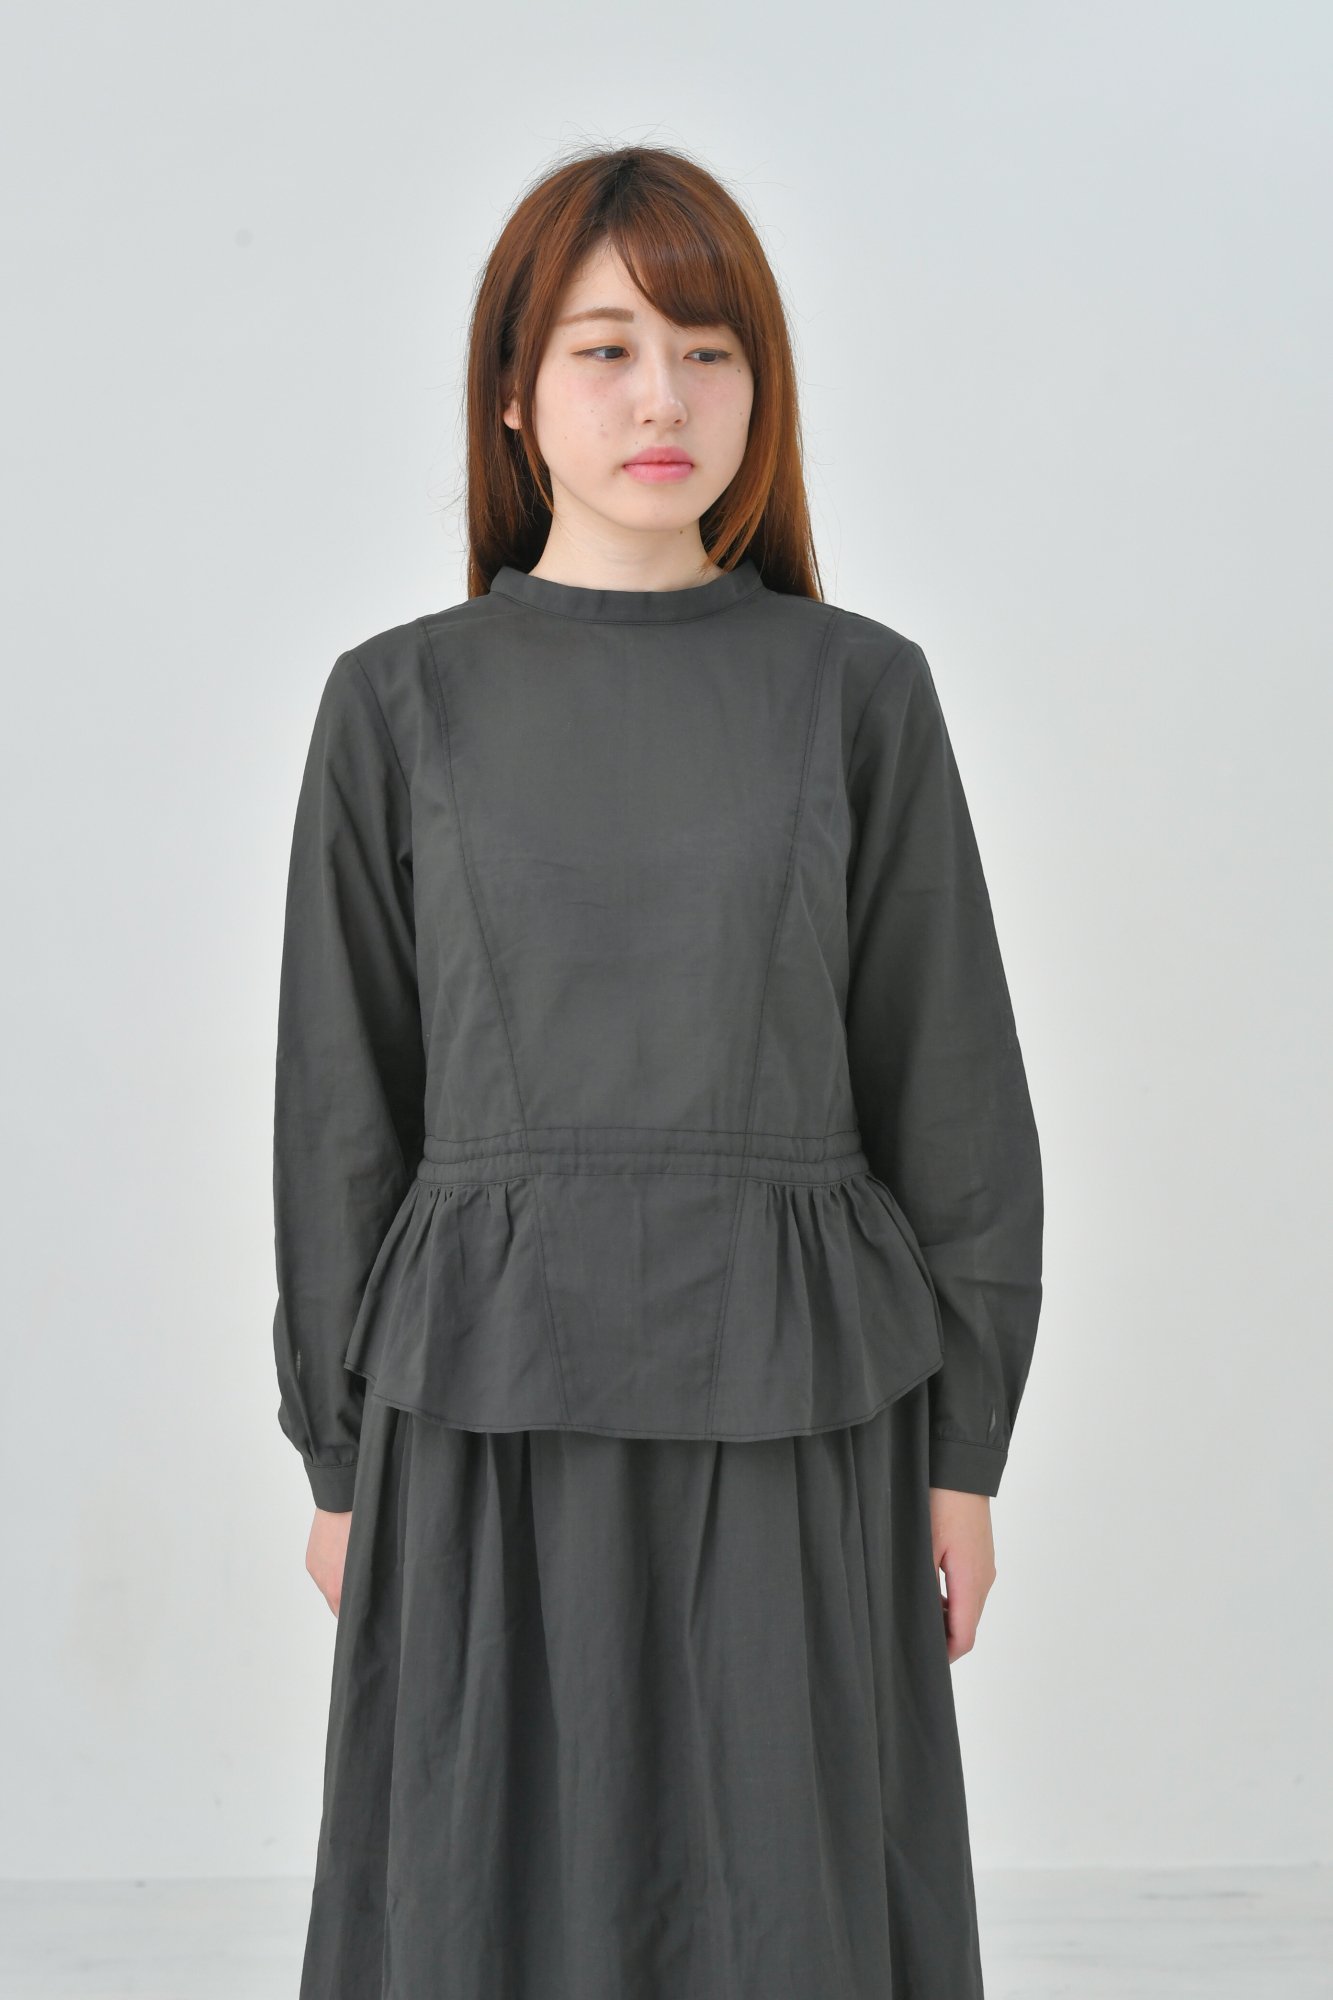 the last flower of the afternoon | 梢の影 peplum blouse (charcoal) | ブラウス